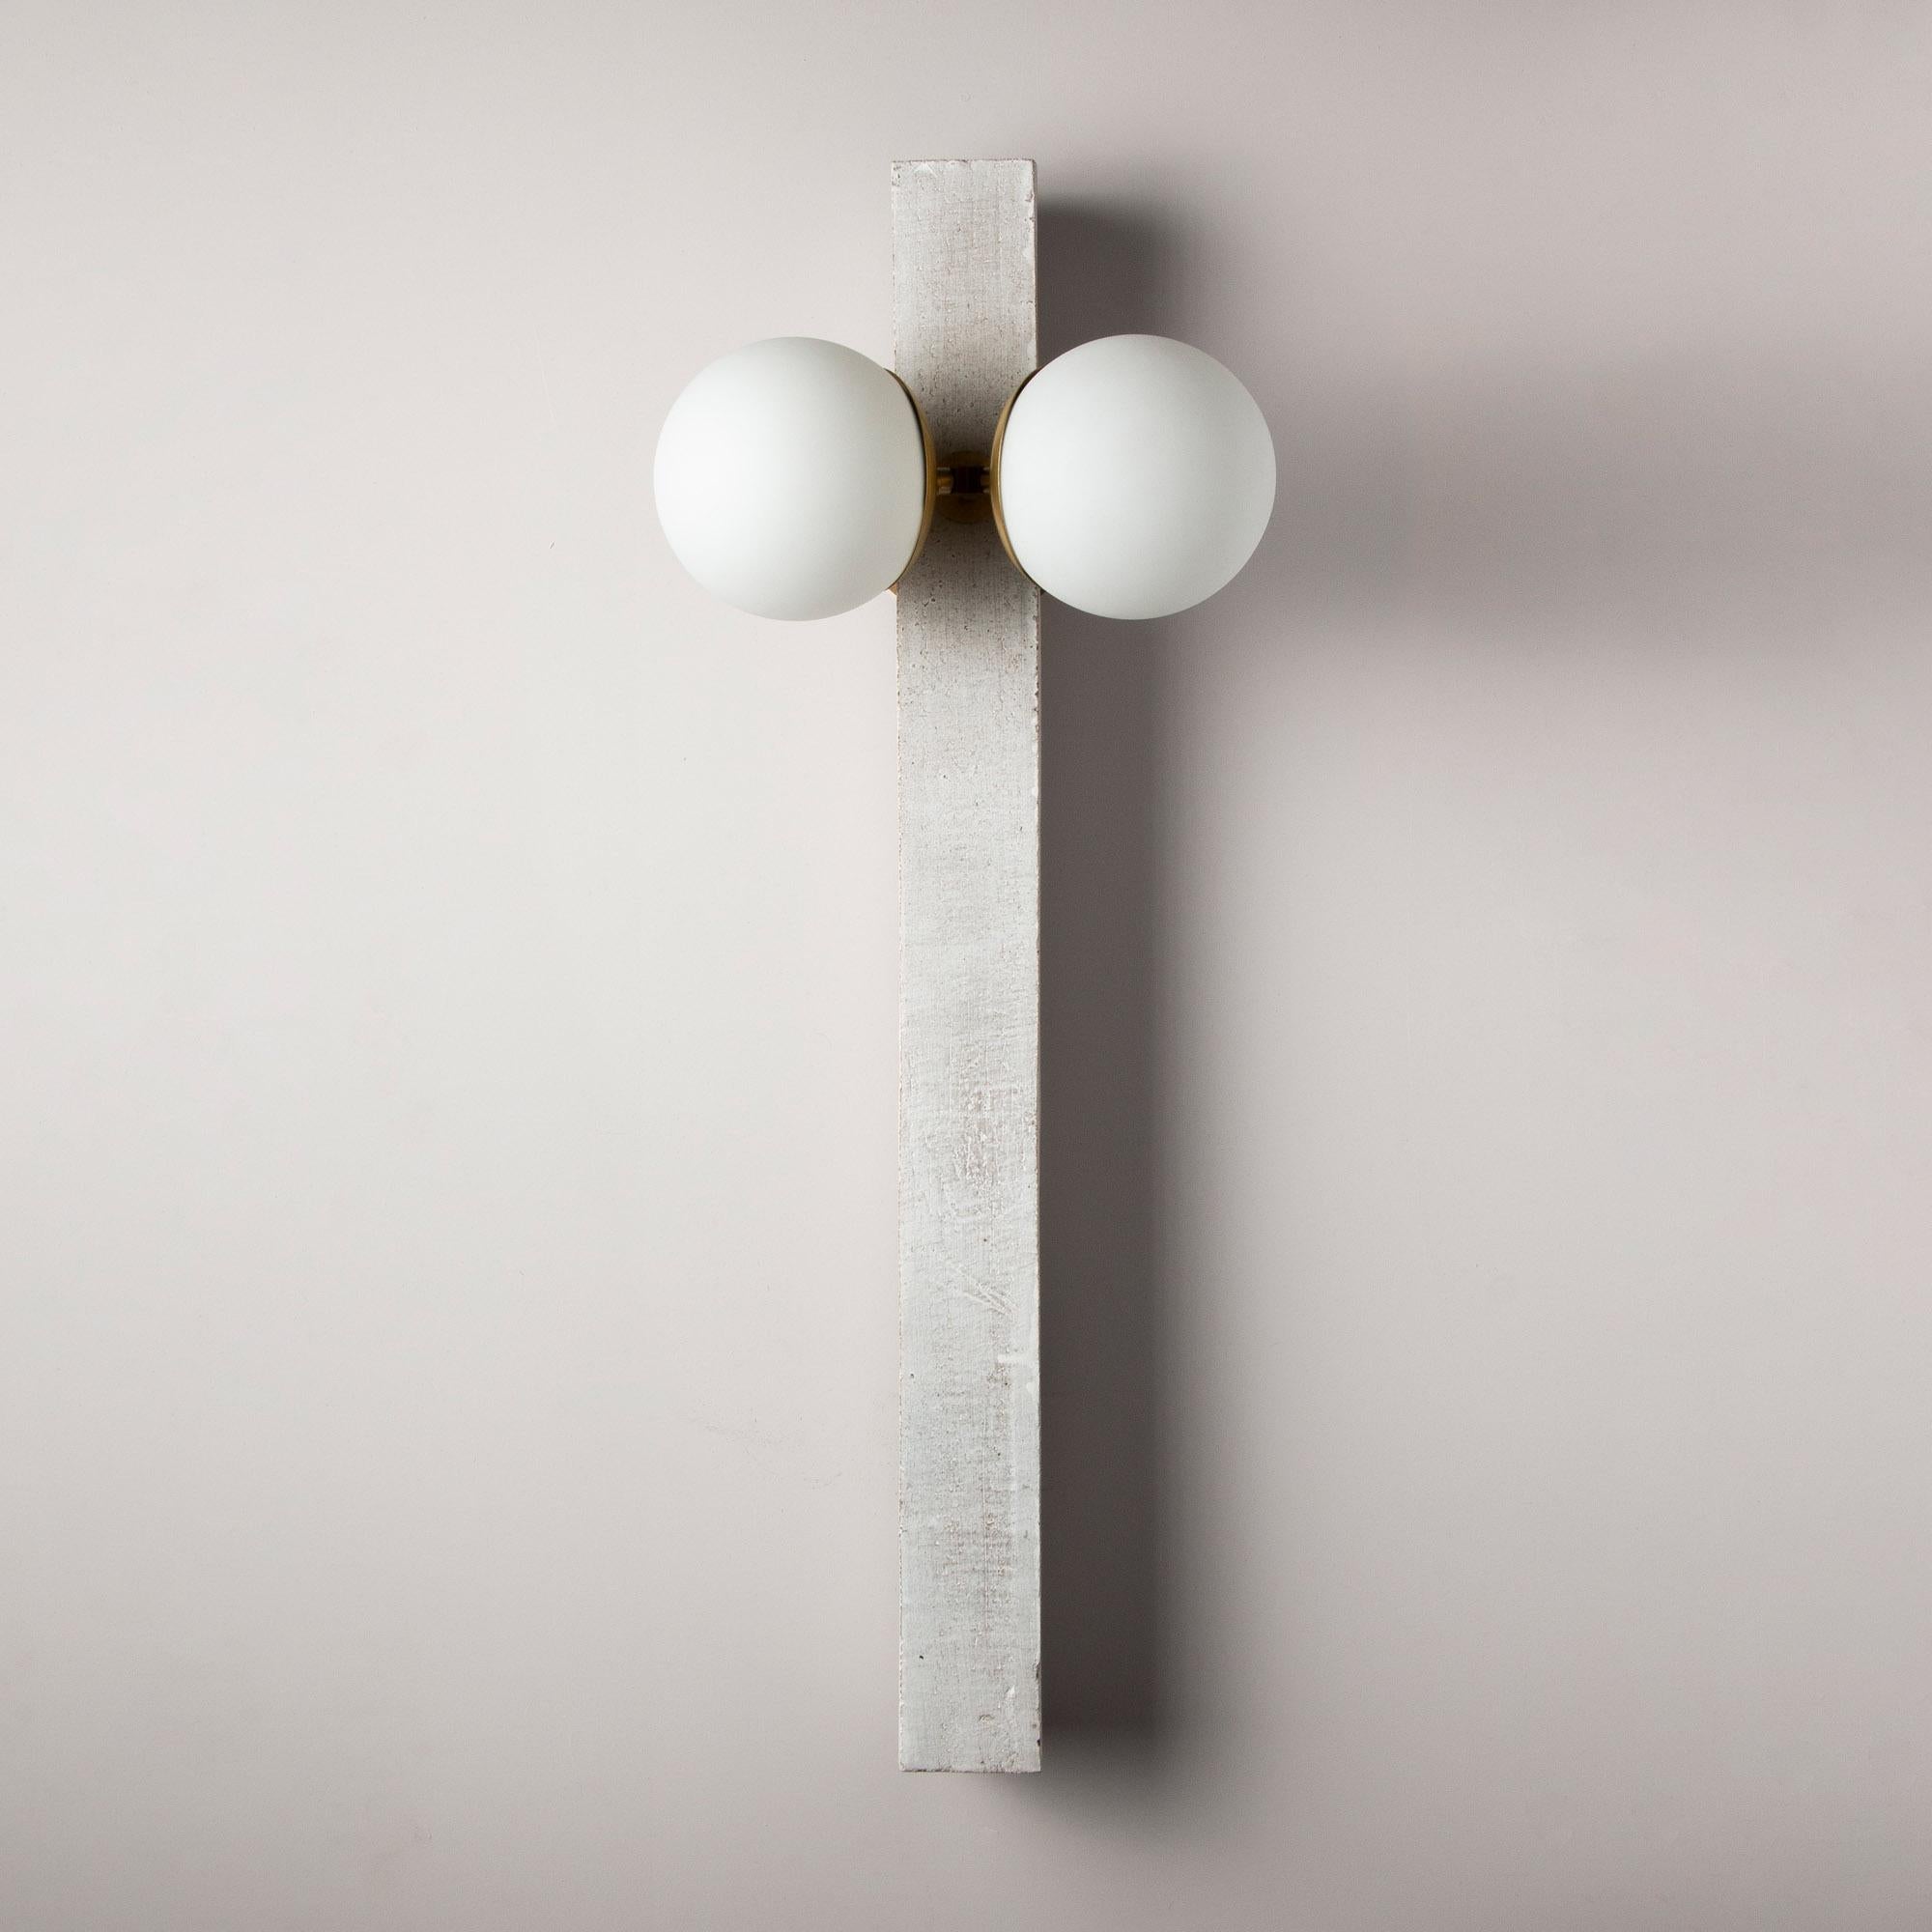 Inspired by midcentury Brutalist architecture and building materials, this minimal handmade sconce balances a strong substantial ceramic base with delicate brass hardware and matte white glass. The substantial ceramic center column is handcrafted